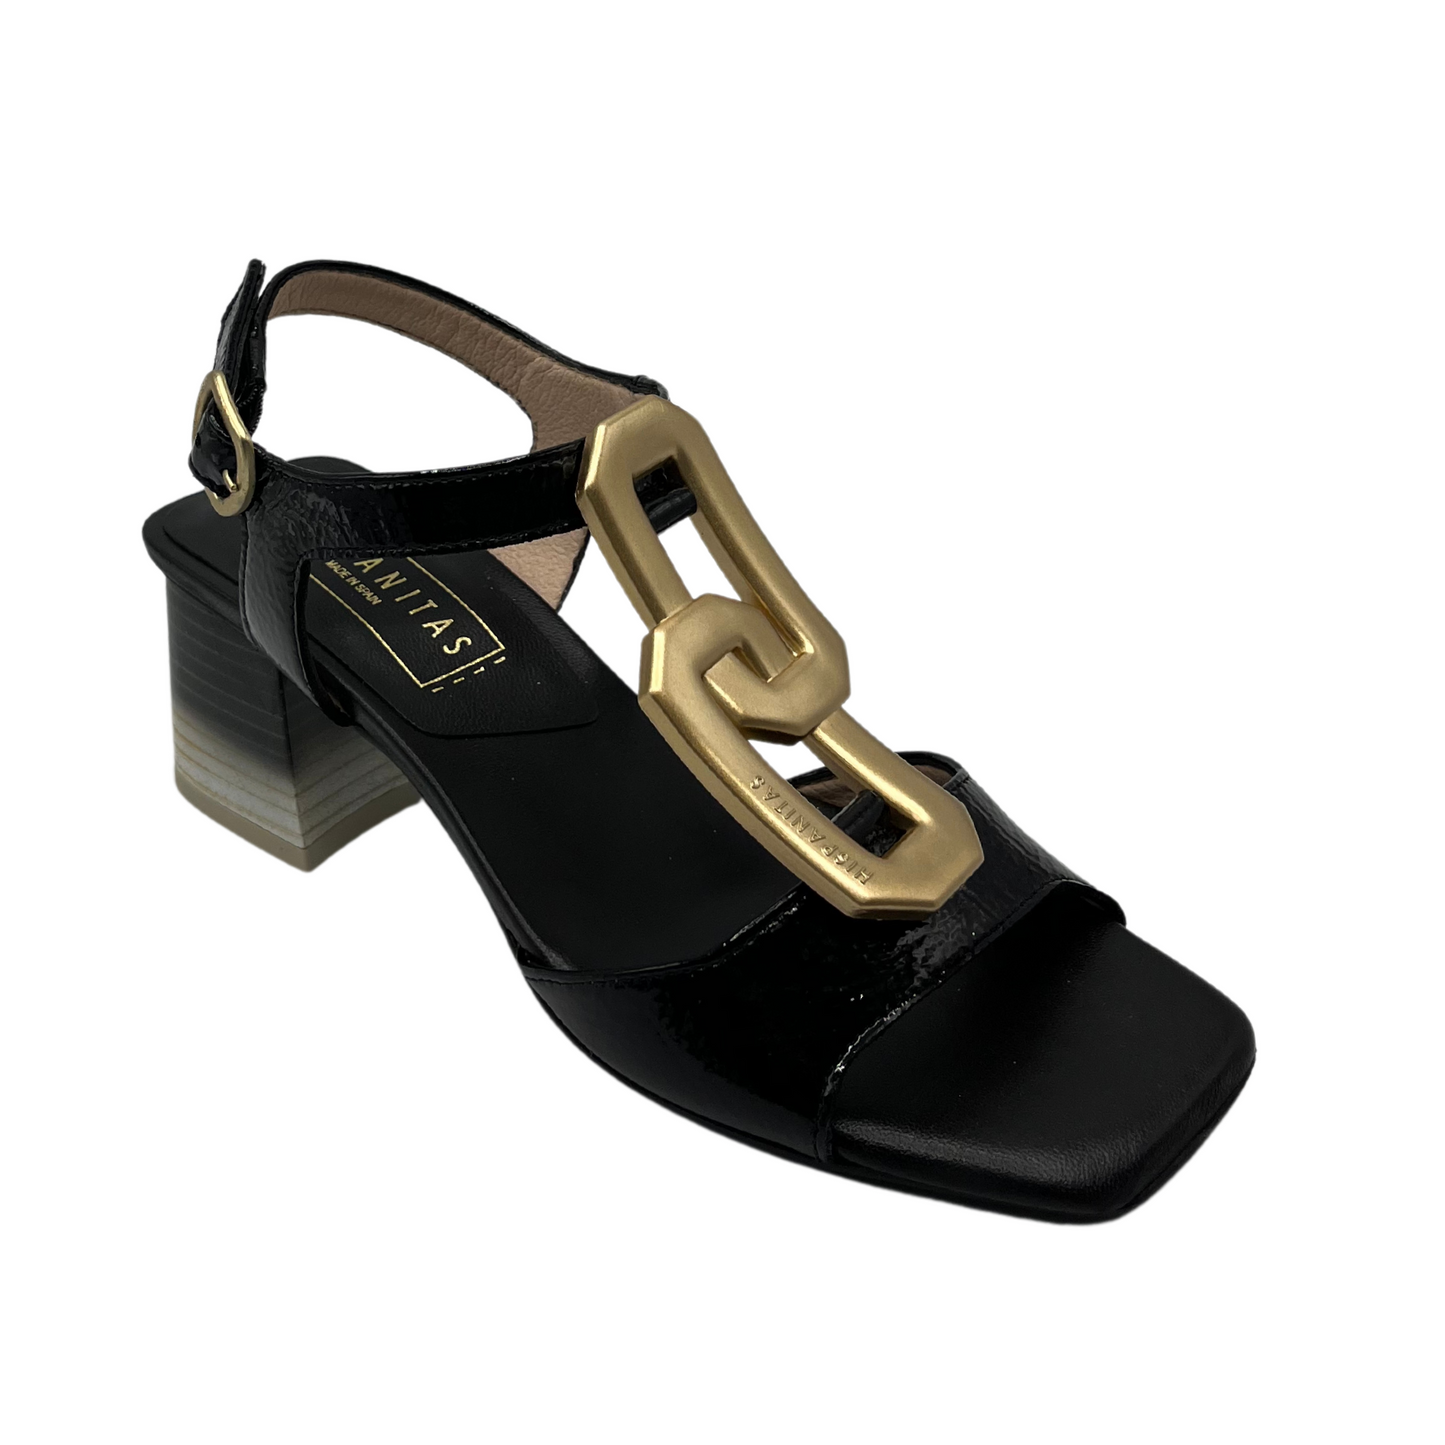 45 degree angled view of black and gold sandal with patent leather and gold brooch detail on upper